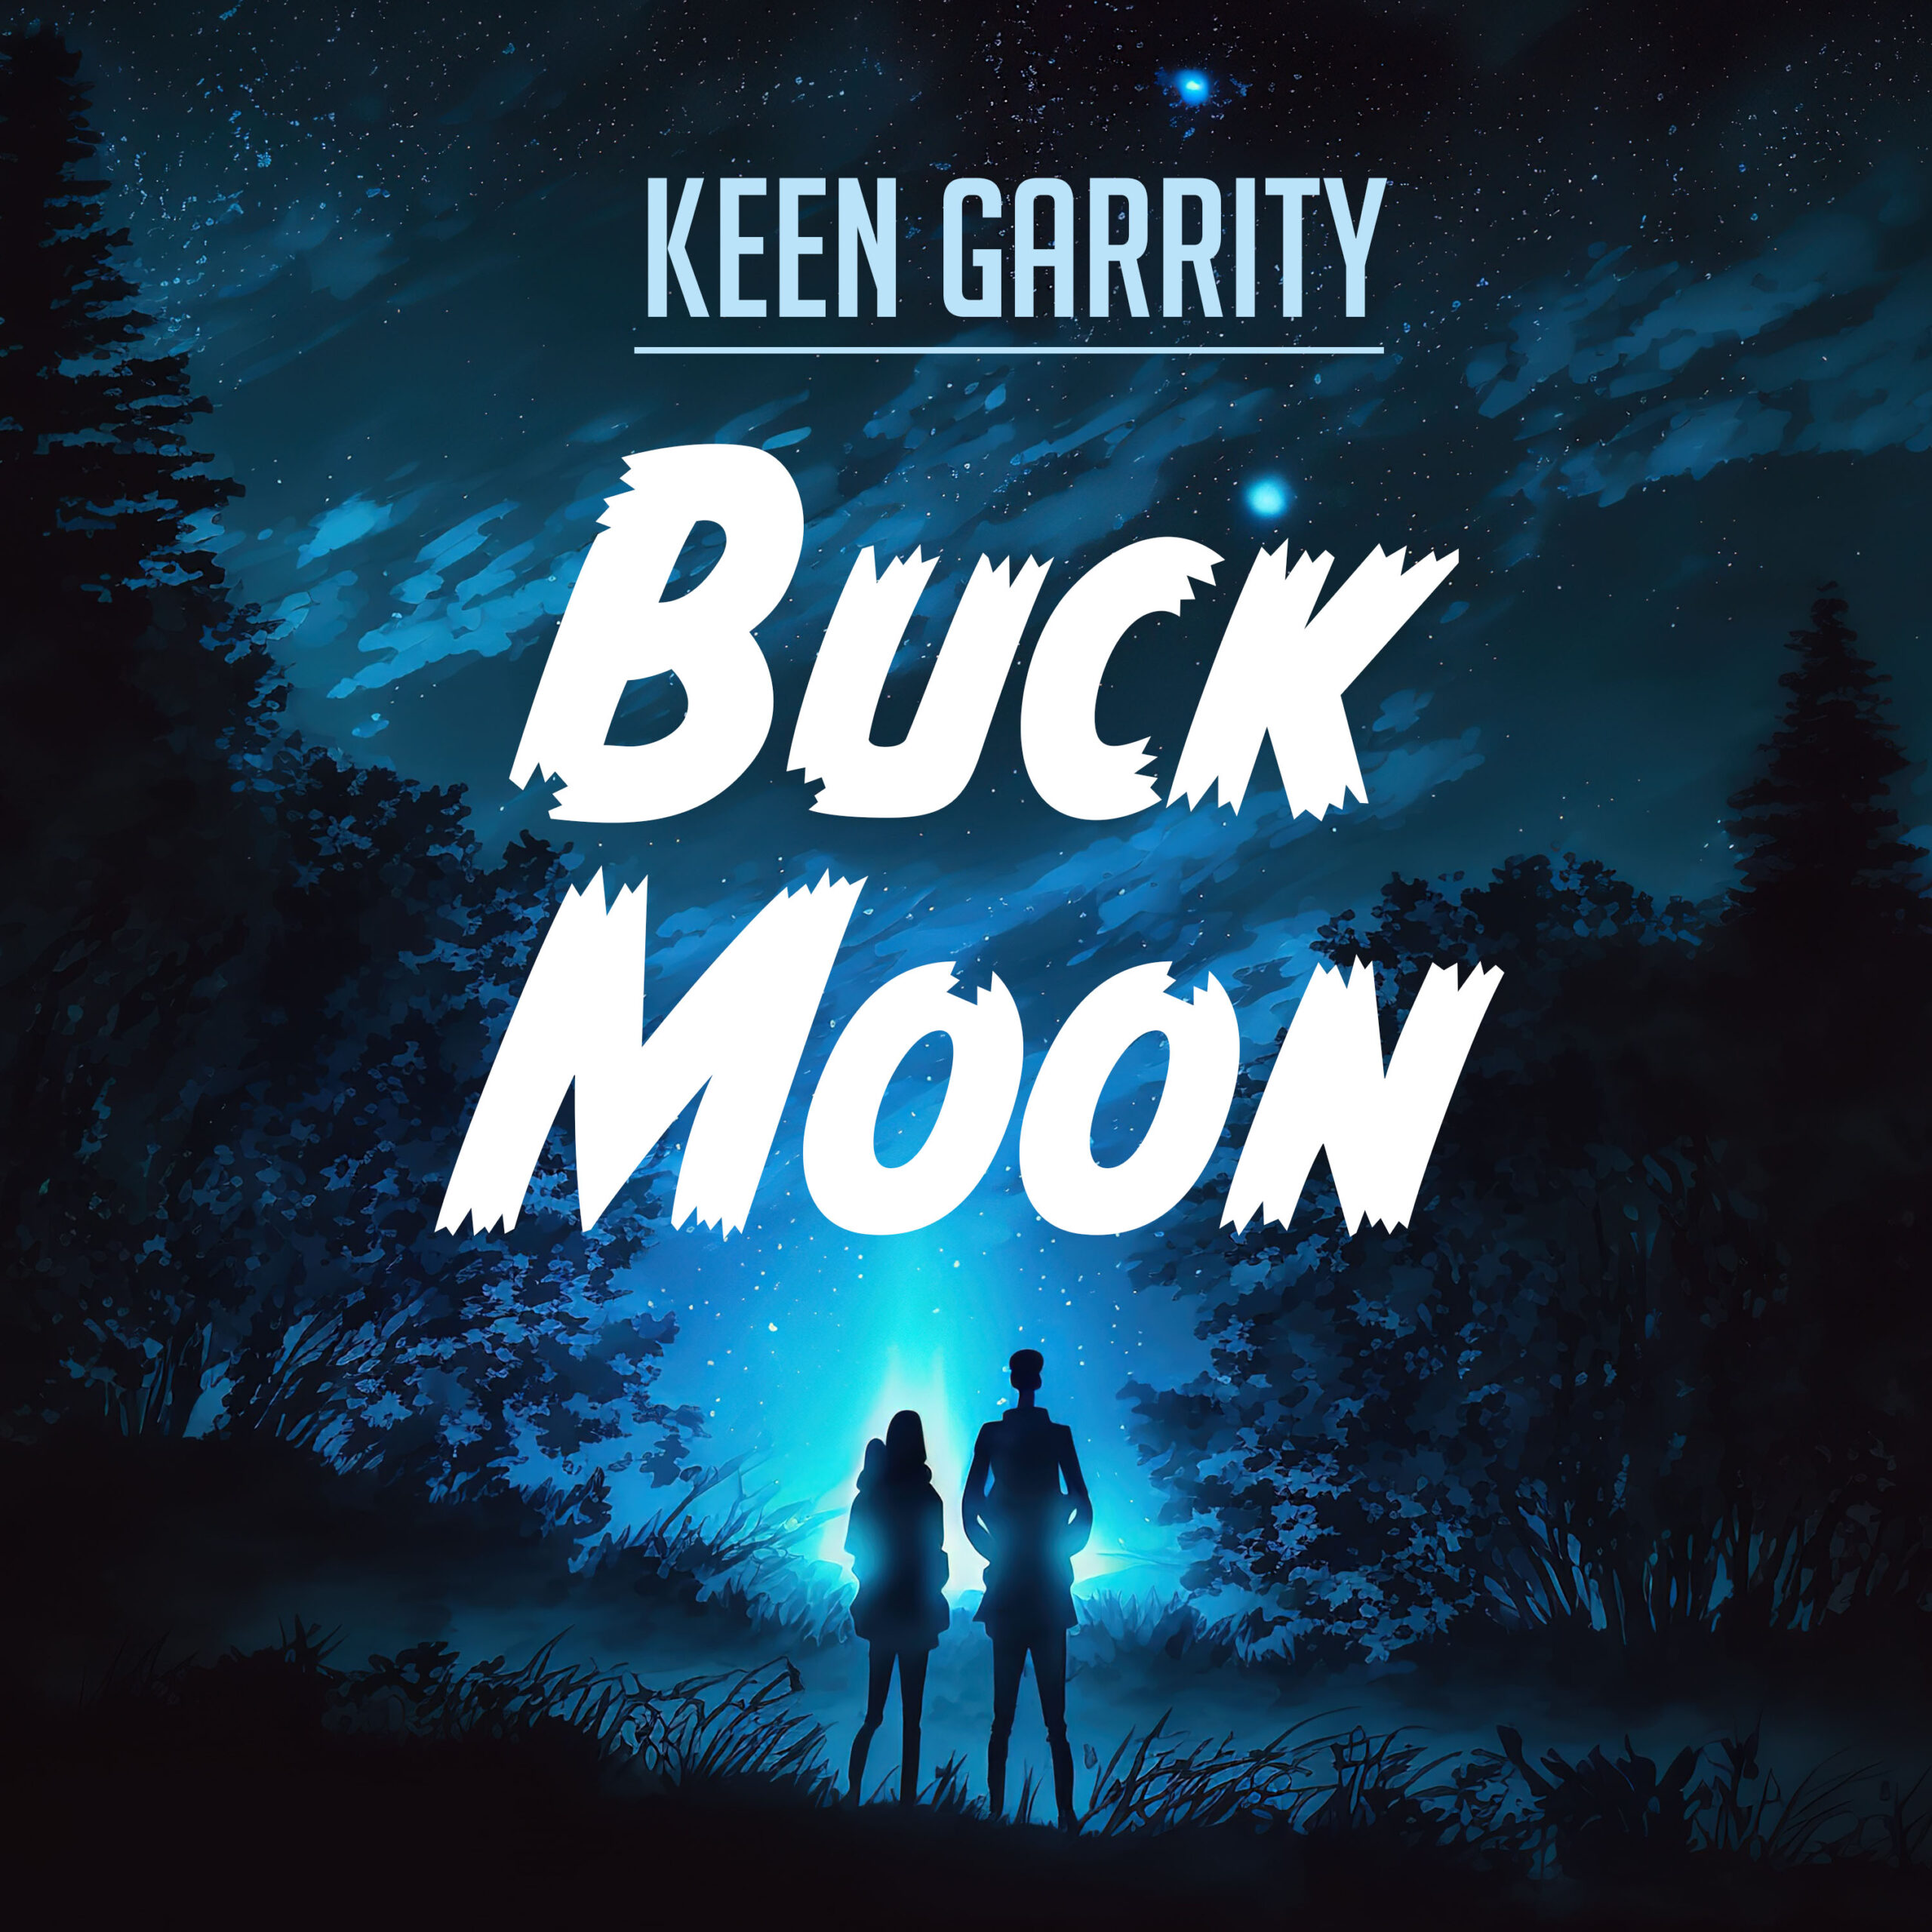 an illustration of a silhouette of a couple standing outside under a night sky. Text on the image reads "Keen Garrity, Buck Moon" in a rustic-style font.